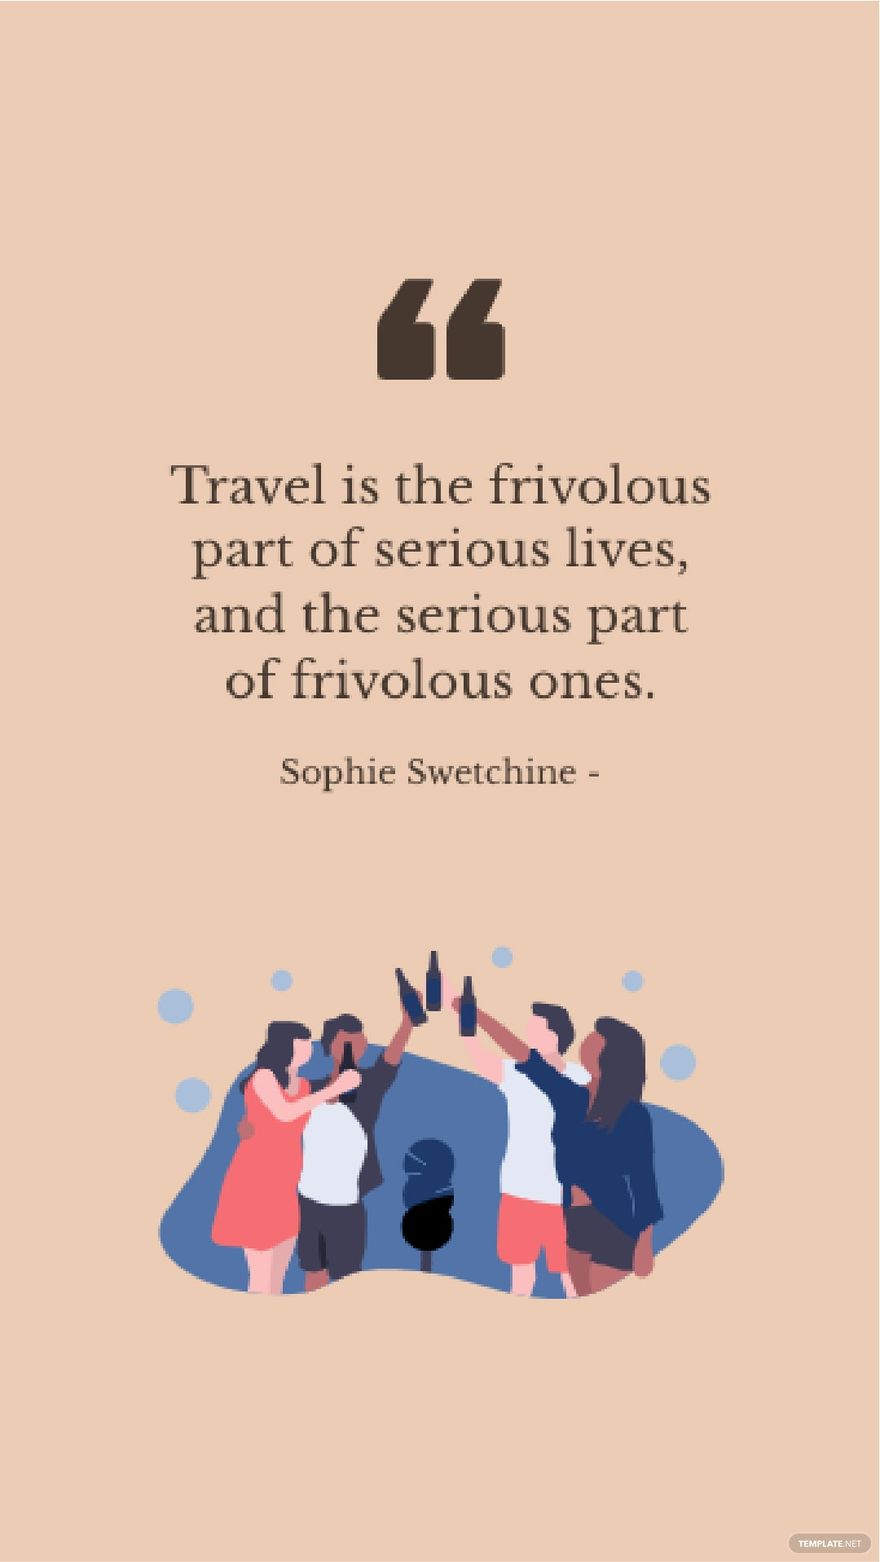 Free Sophie Swetchine - Travel is the frivolous part of serious lives, and the serious part of frivolous ones. in JPG